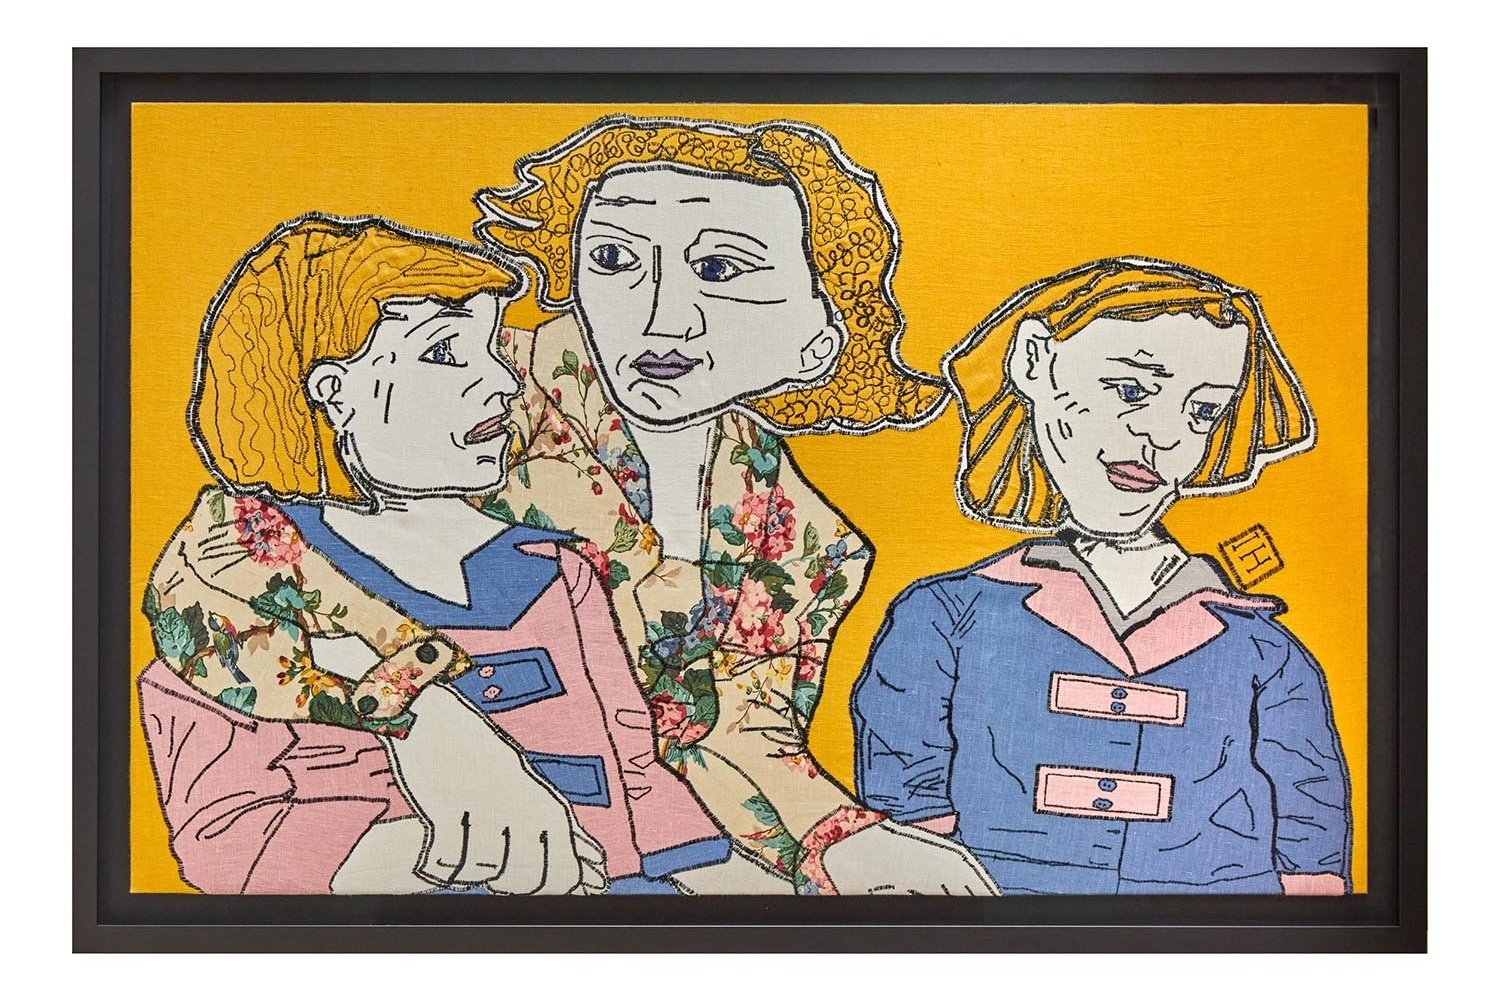 015-Woman-With-Two-Children-132x180cm-Framed.jpg